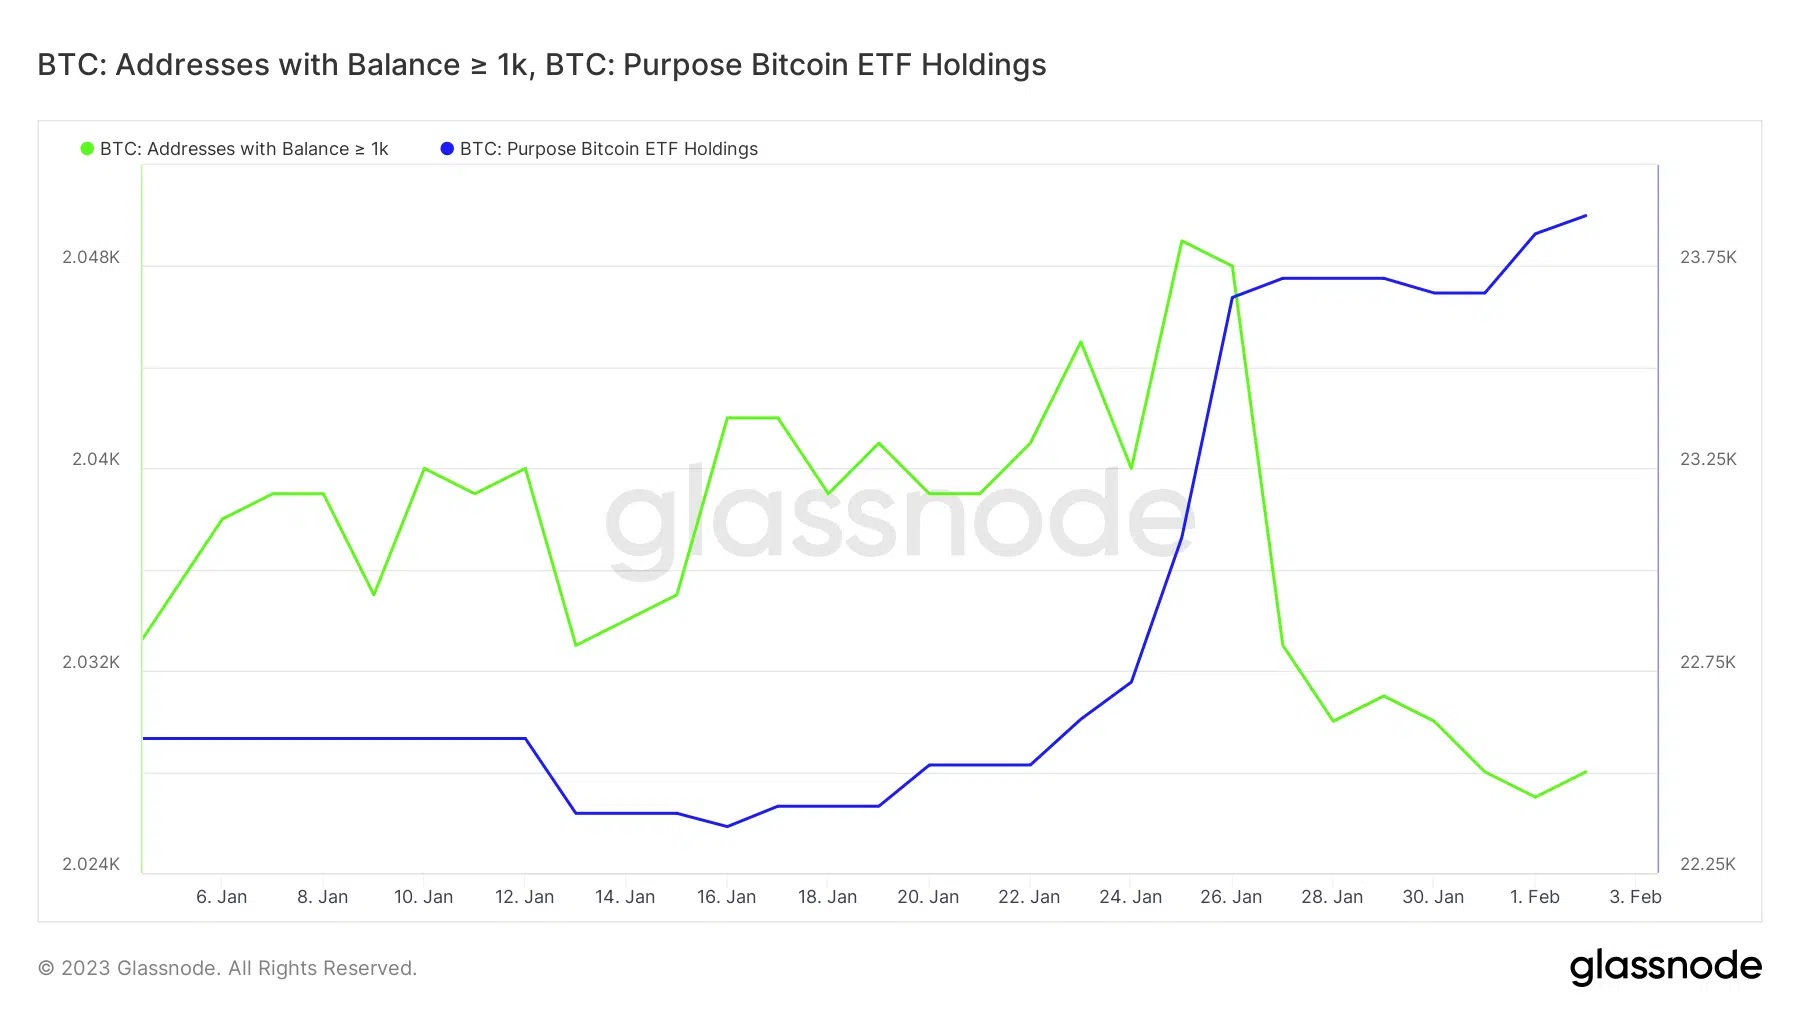 Bitcoin addresses with more than 1k BTC and Purpose Bitcoin ETF holdings